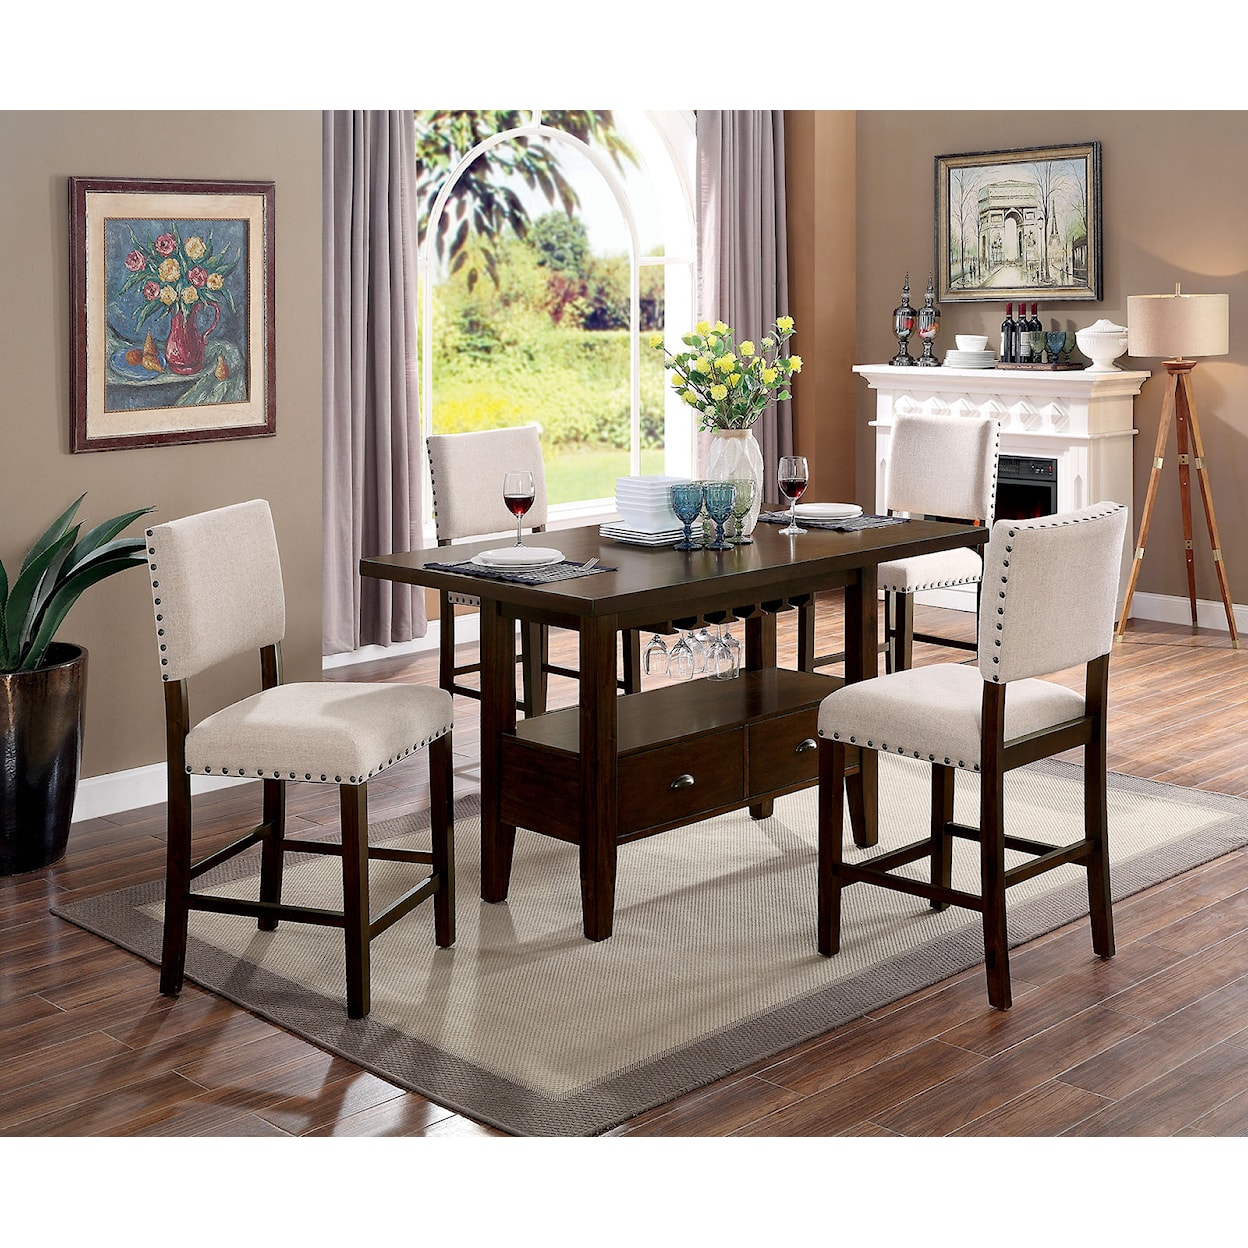 Furniture of America Lordello Counter Height Dining Table